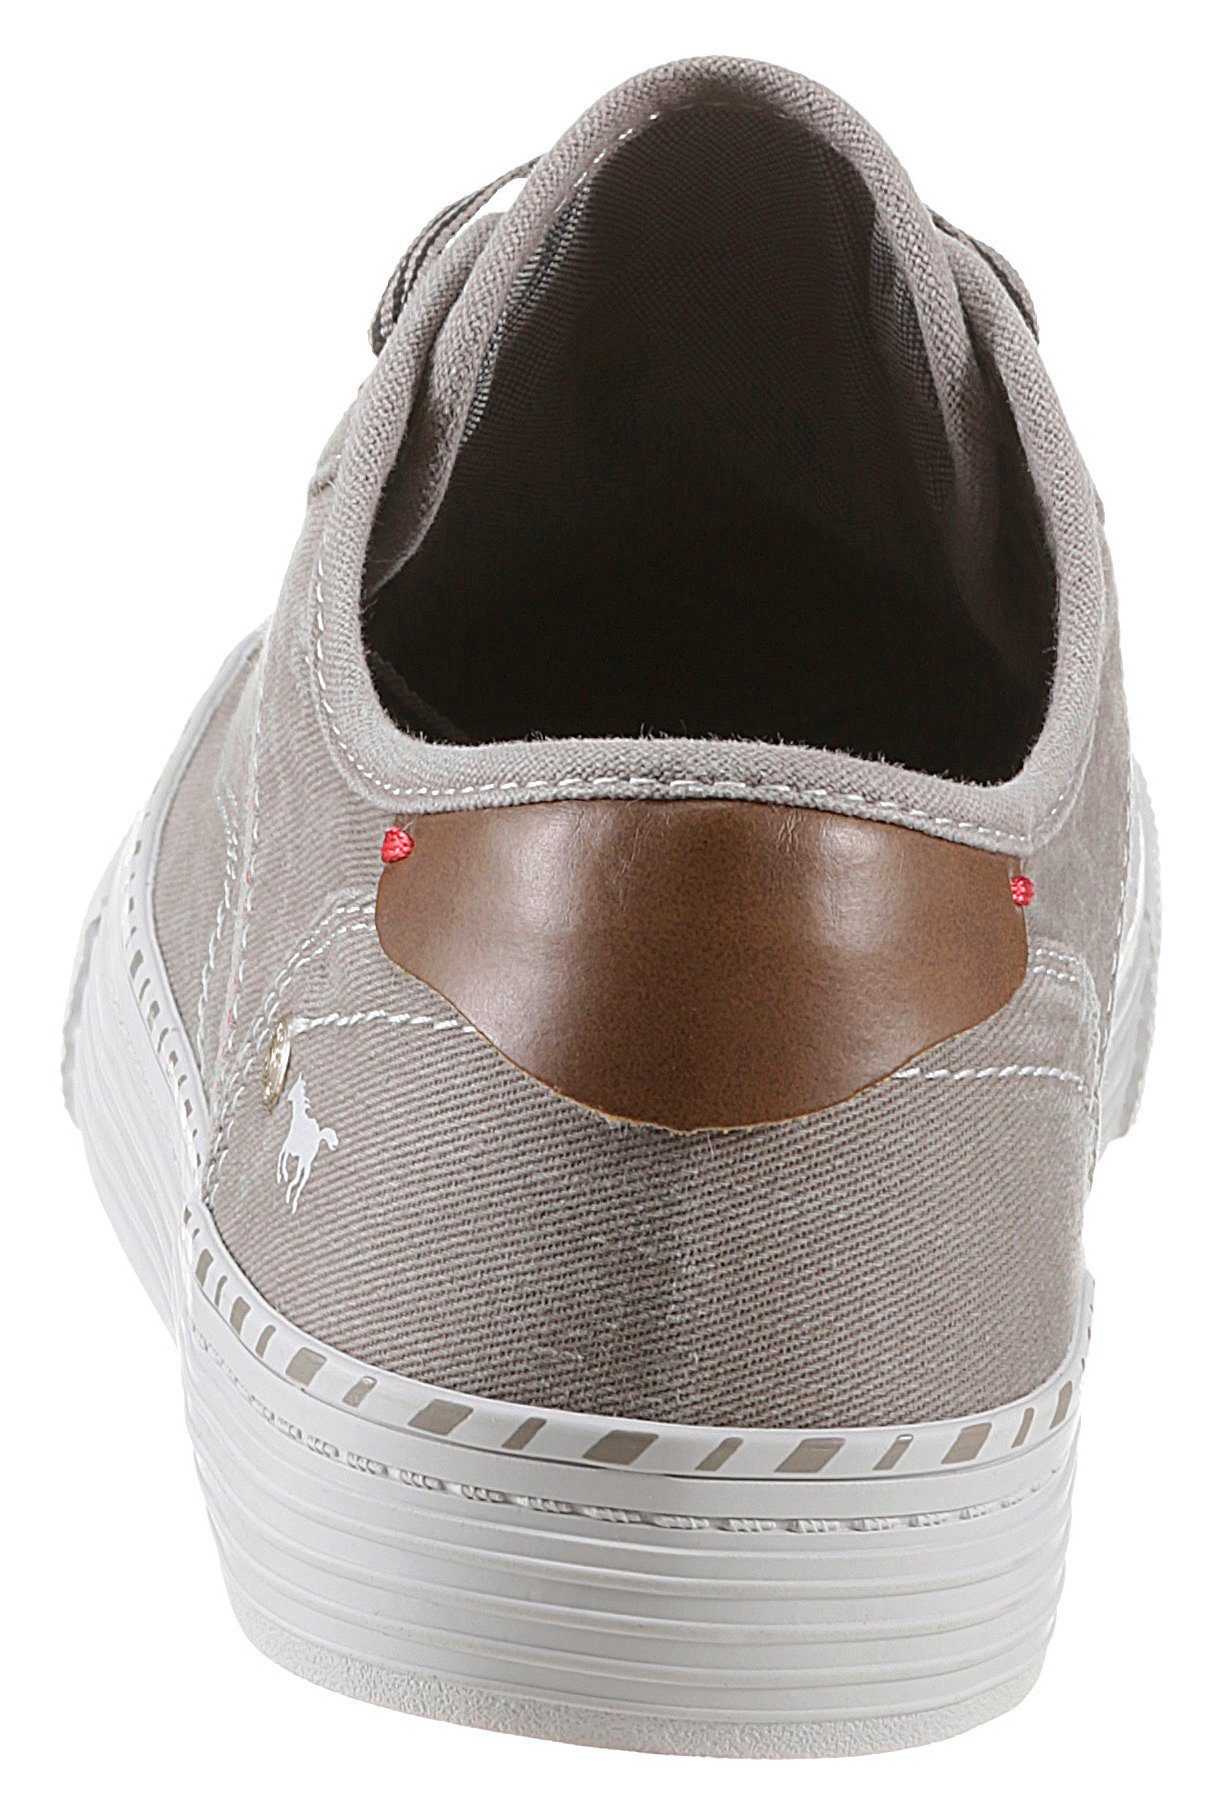 Mustang taupe 3 cm Shoes Plateausohle mit Sneaker